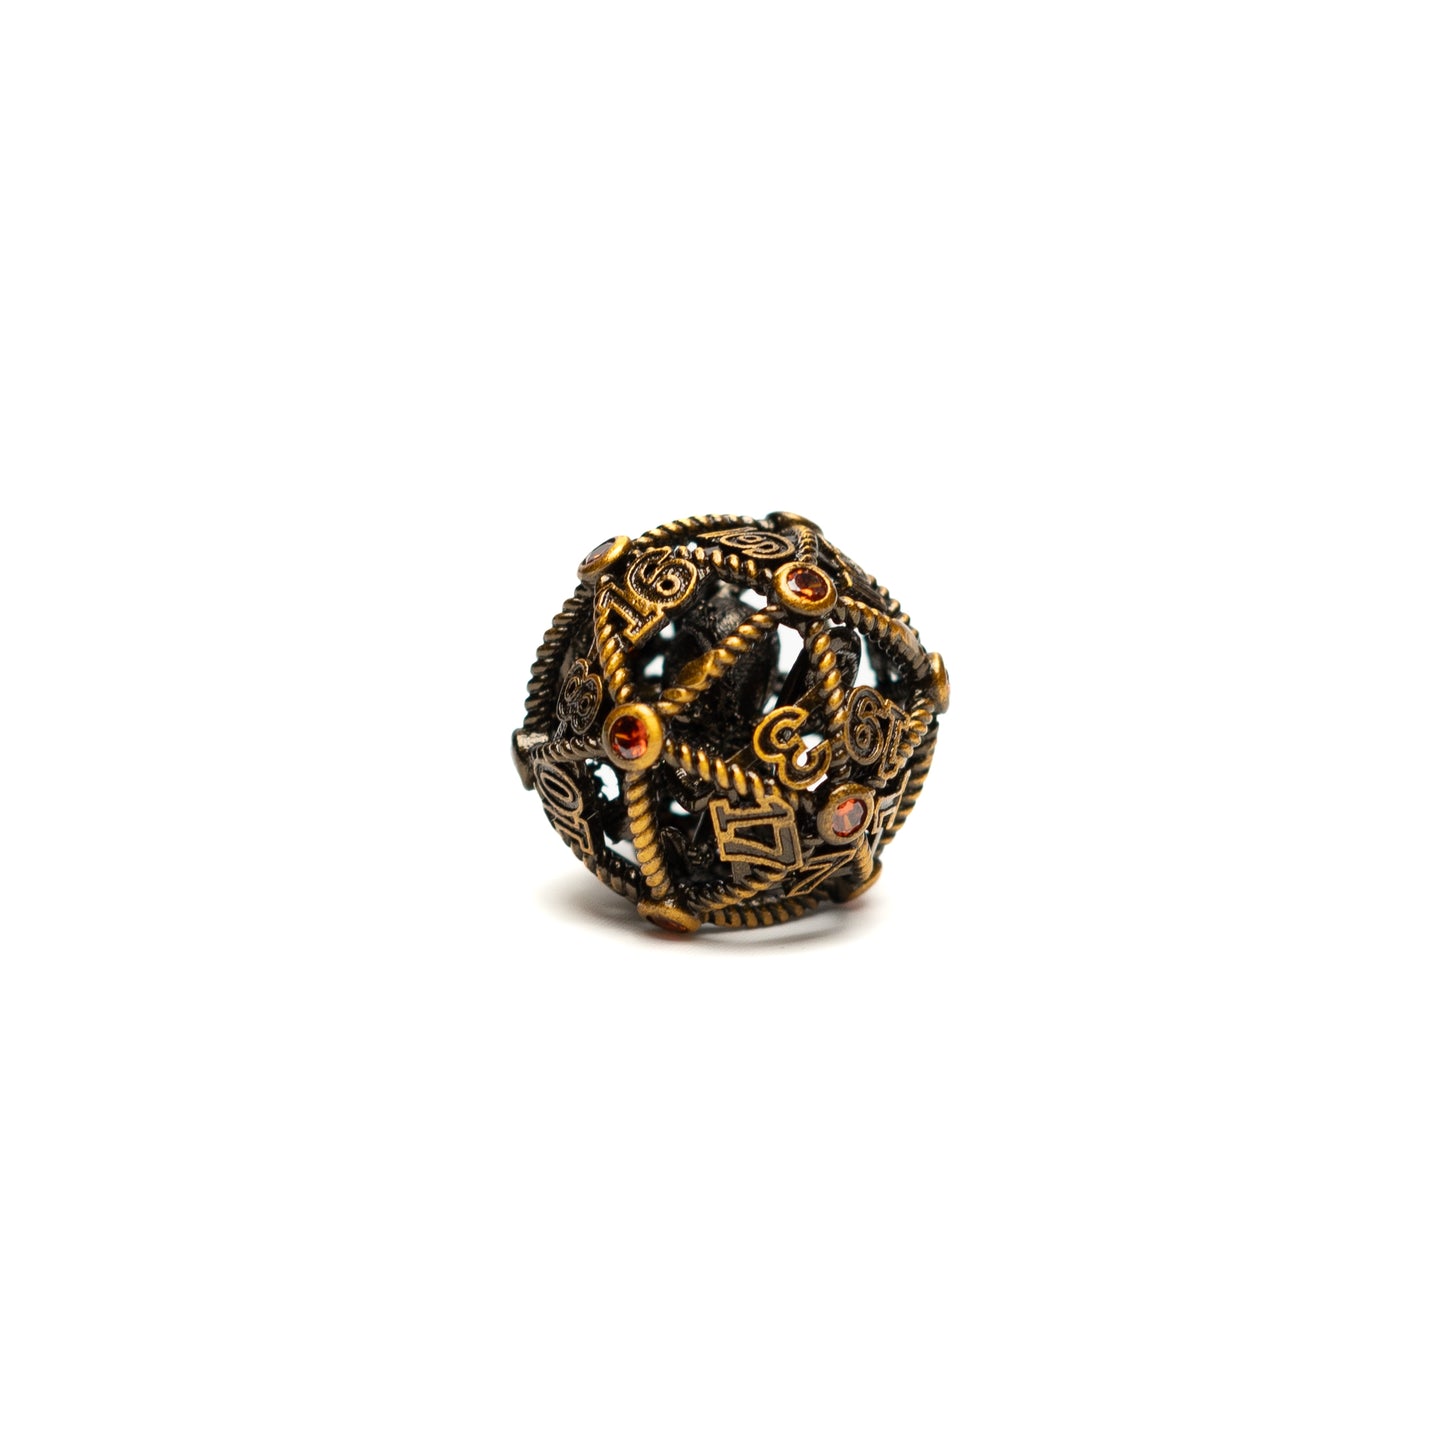 Roll Britannia Metal Dungeons and Dragons D20 Dice with Nautical Kraken Aesthetic